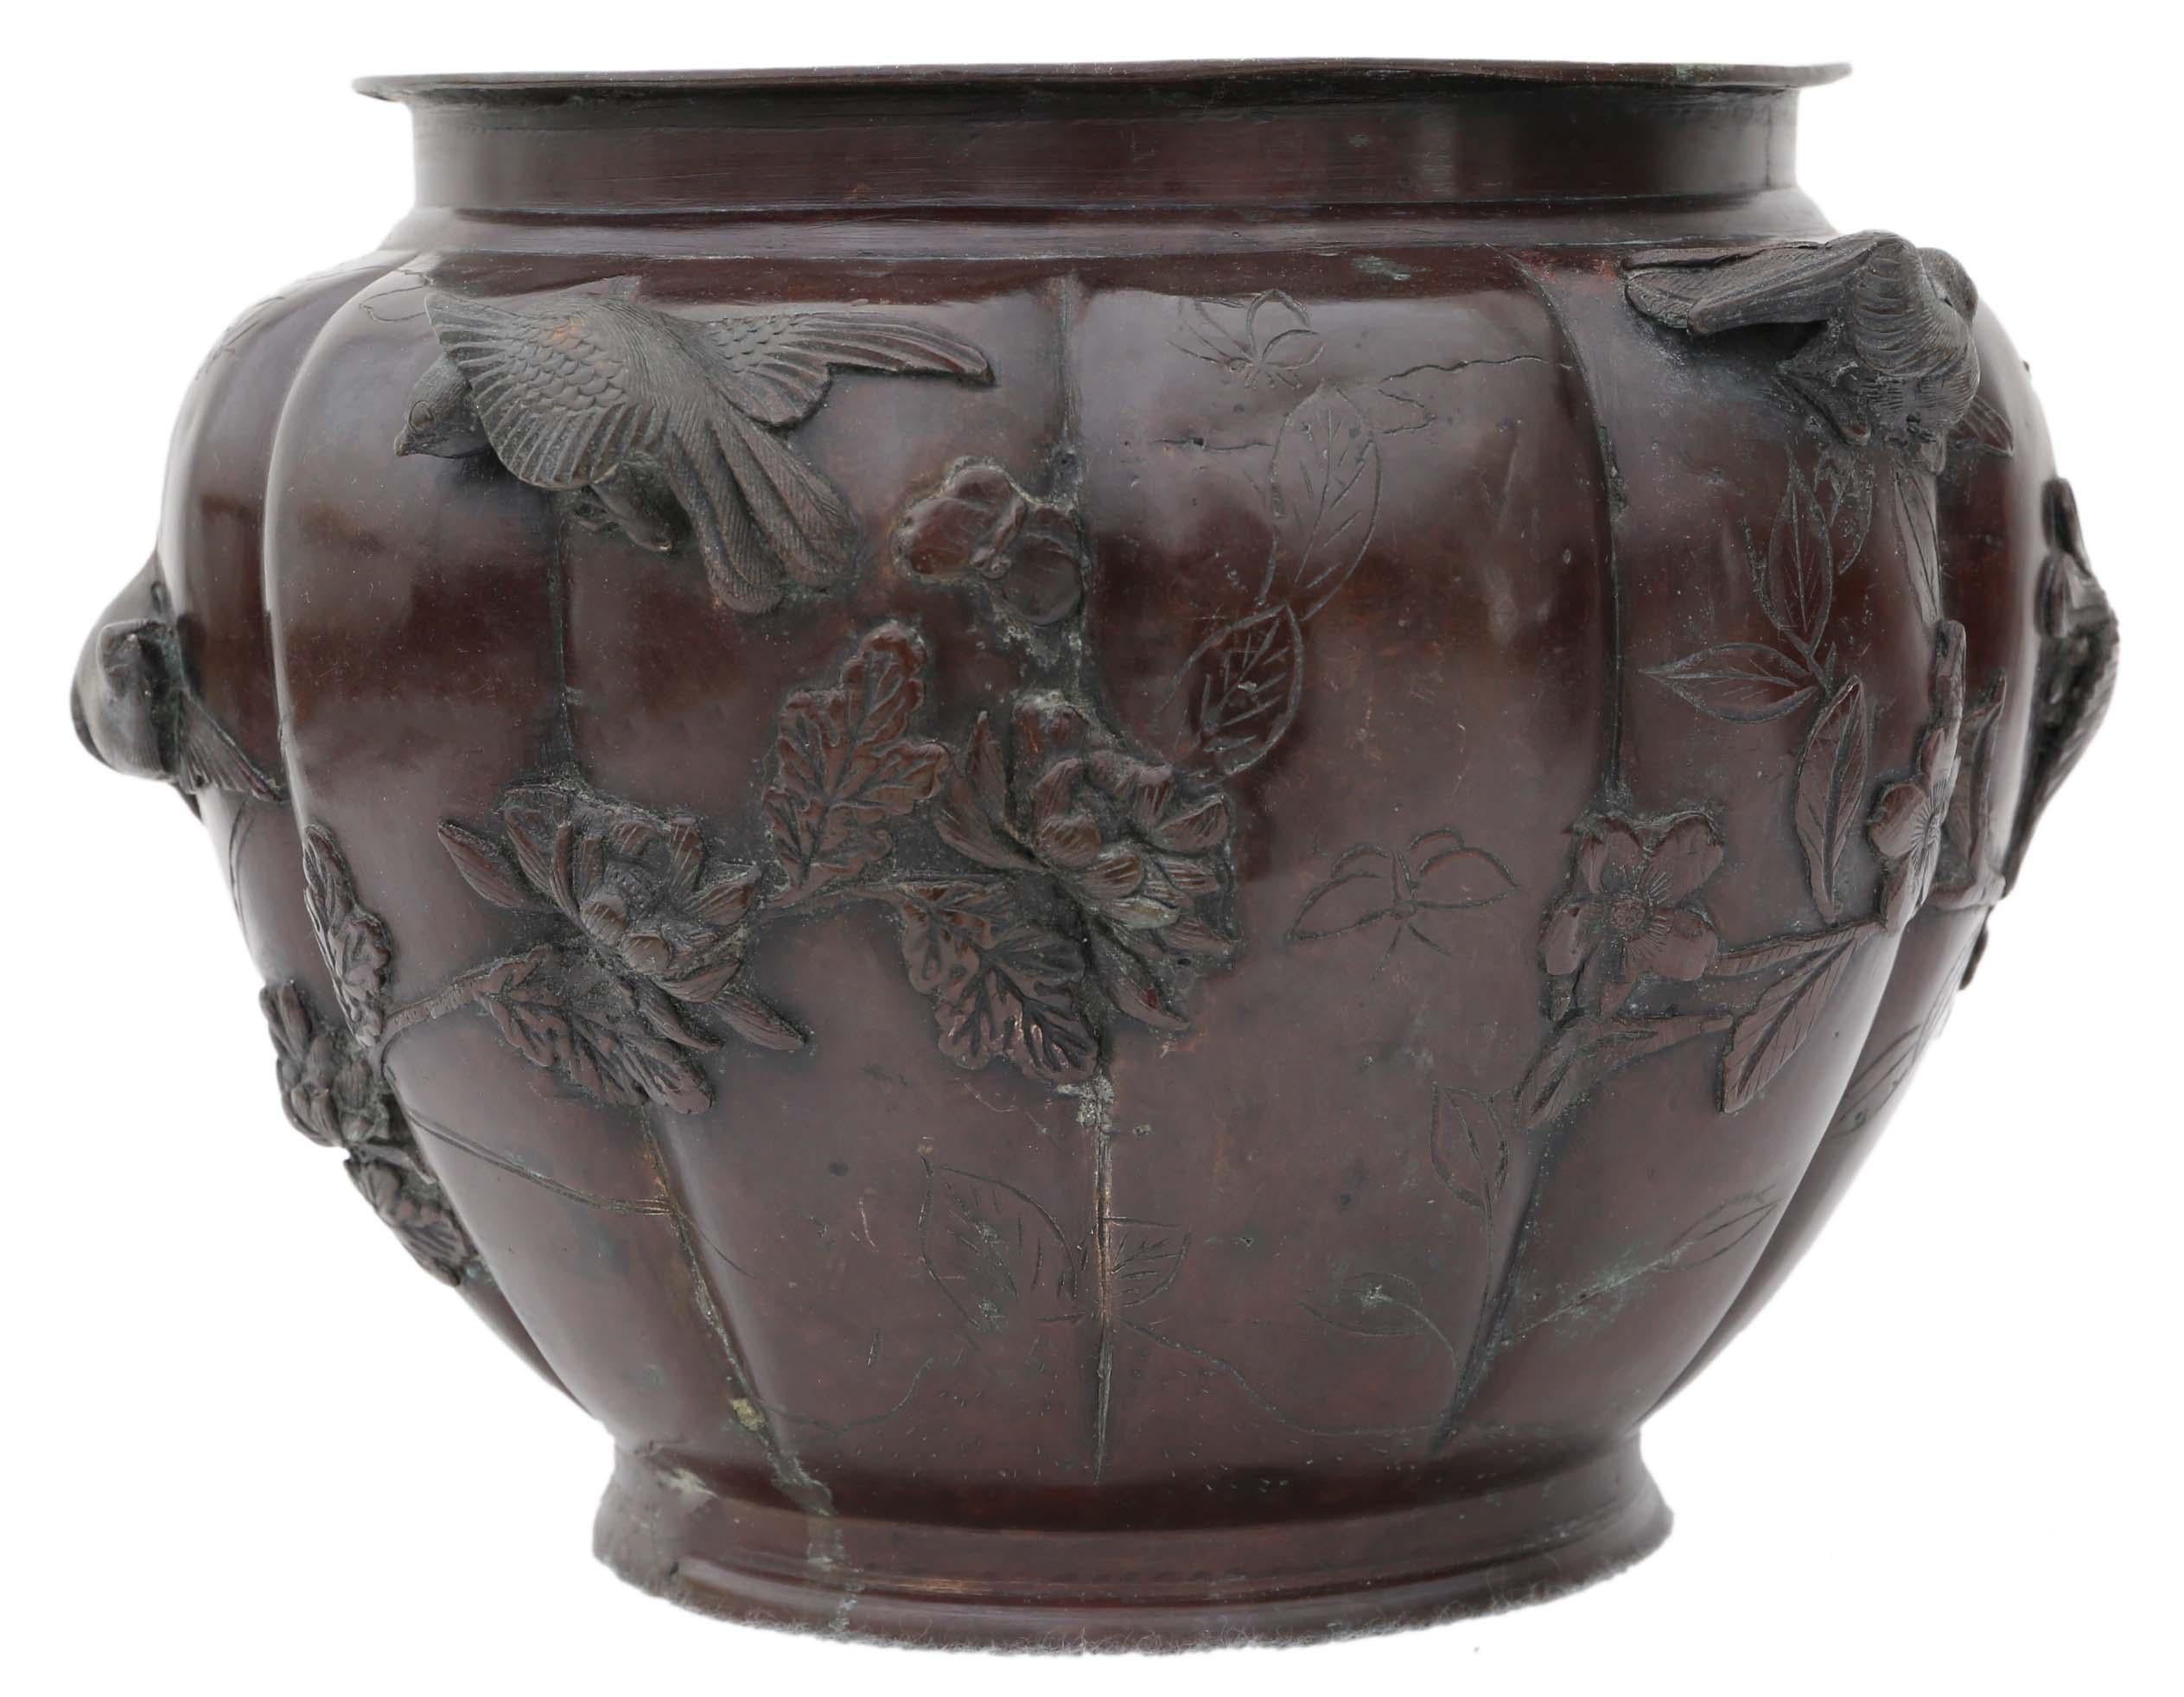 Antique large Japanese 19th century bronze jardinière planter.

Would look amazing in the right location. The best colour and patina.

Overall maximum dimensions: 28 cm diameter x 22 cm high.

In good antique condition, with historic knocks